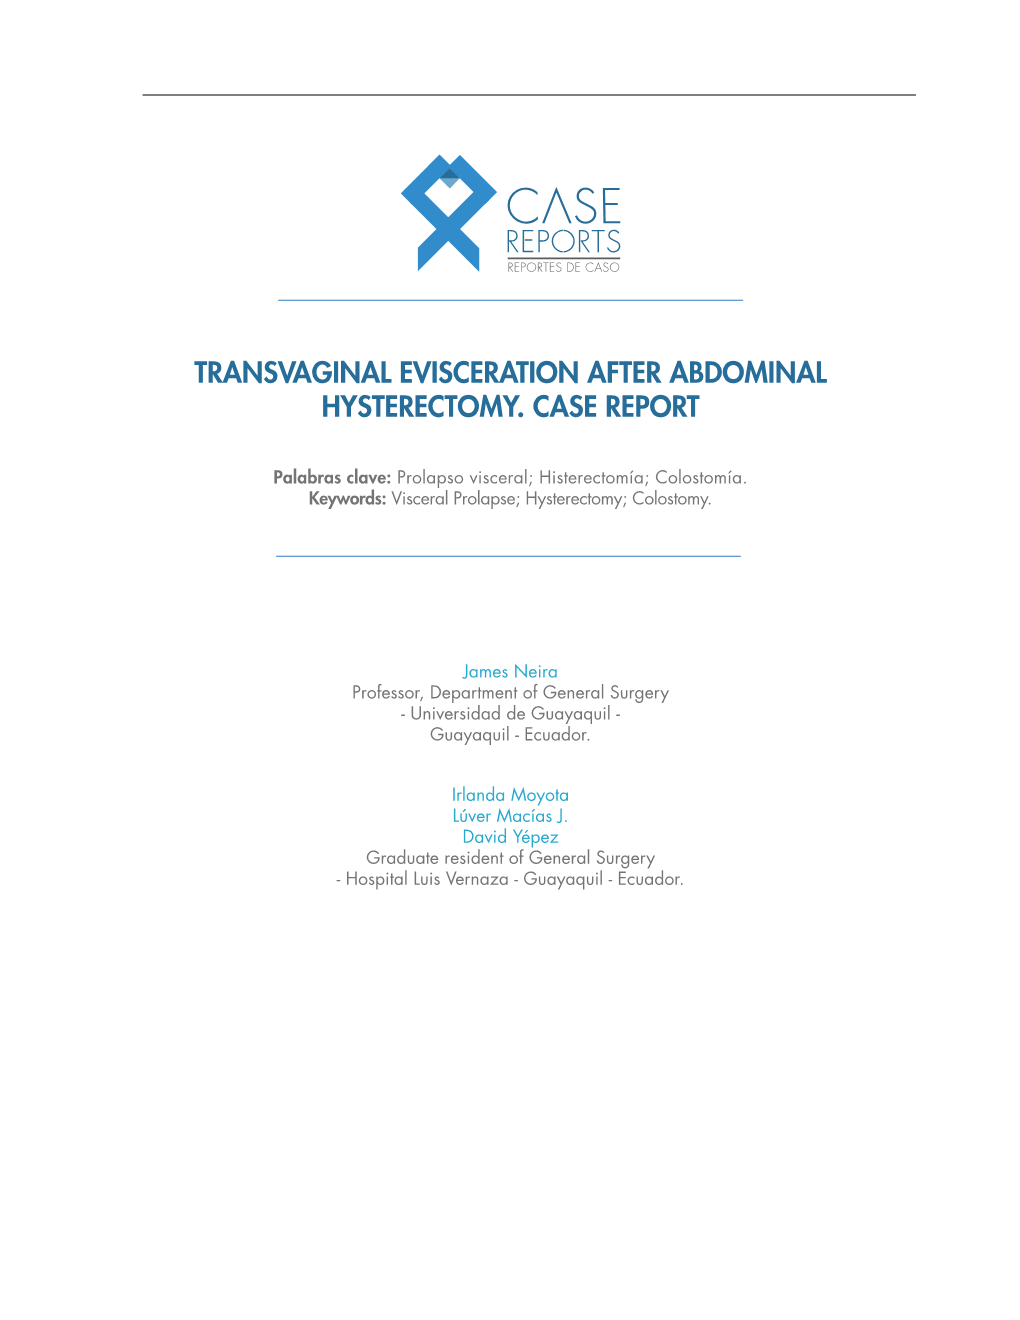 Transvaginal Evisceration After Abdominal Hysterectomy